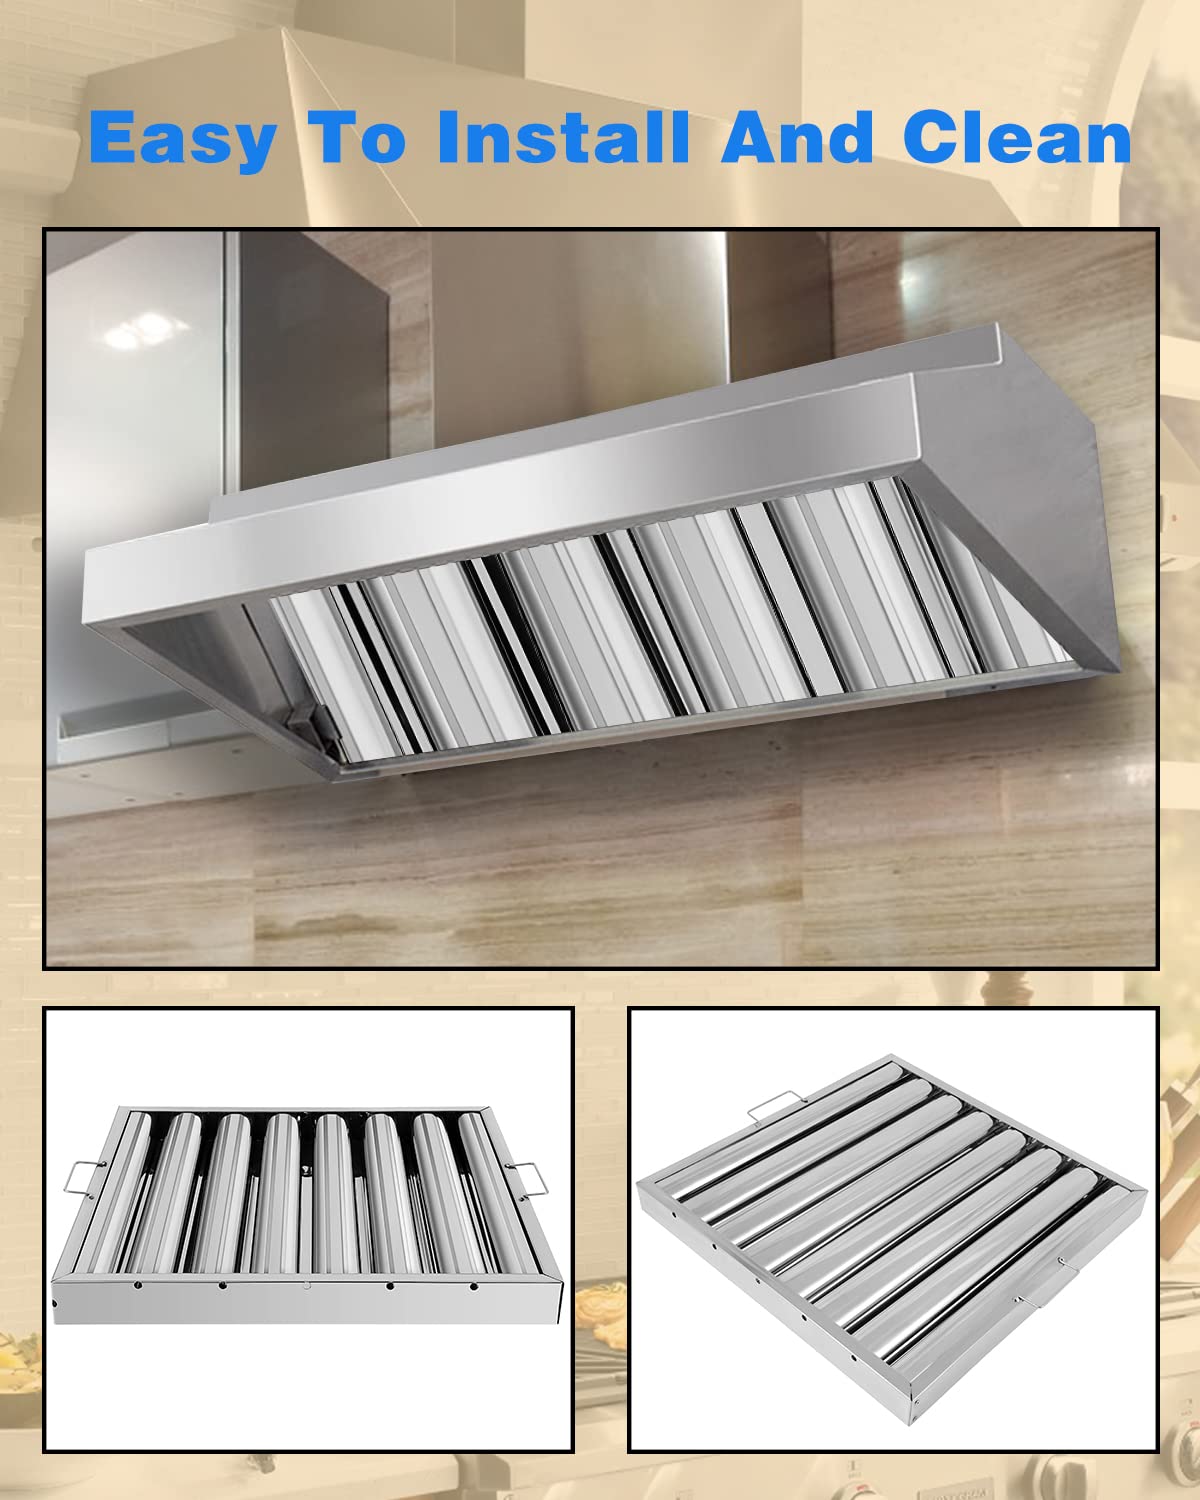 Hood Filters 19.5W x 19.5H Inch, 430 Stainless Steel 7 Grooves Commercial Hood Filters, Range Hood Filter for Grease Rated Commercial Kitchen Exhaust Hoods Pack of 6